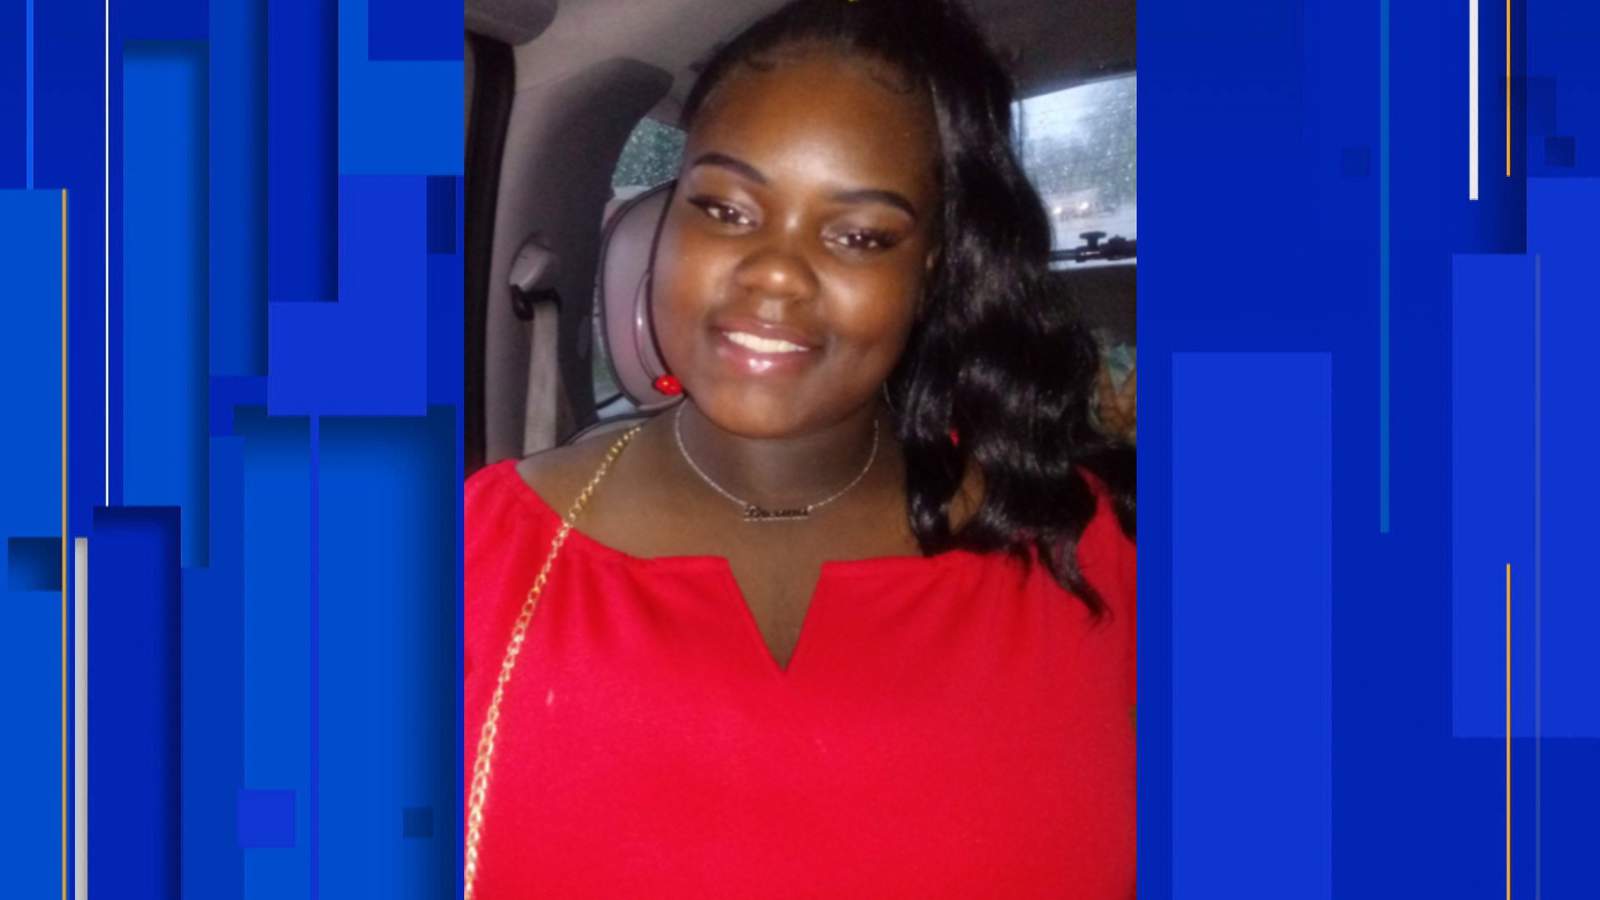 Detroit police are looking for a 17-year-old girl who didn’t return home after saying she’d ‘be right back’